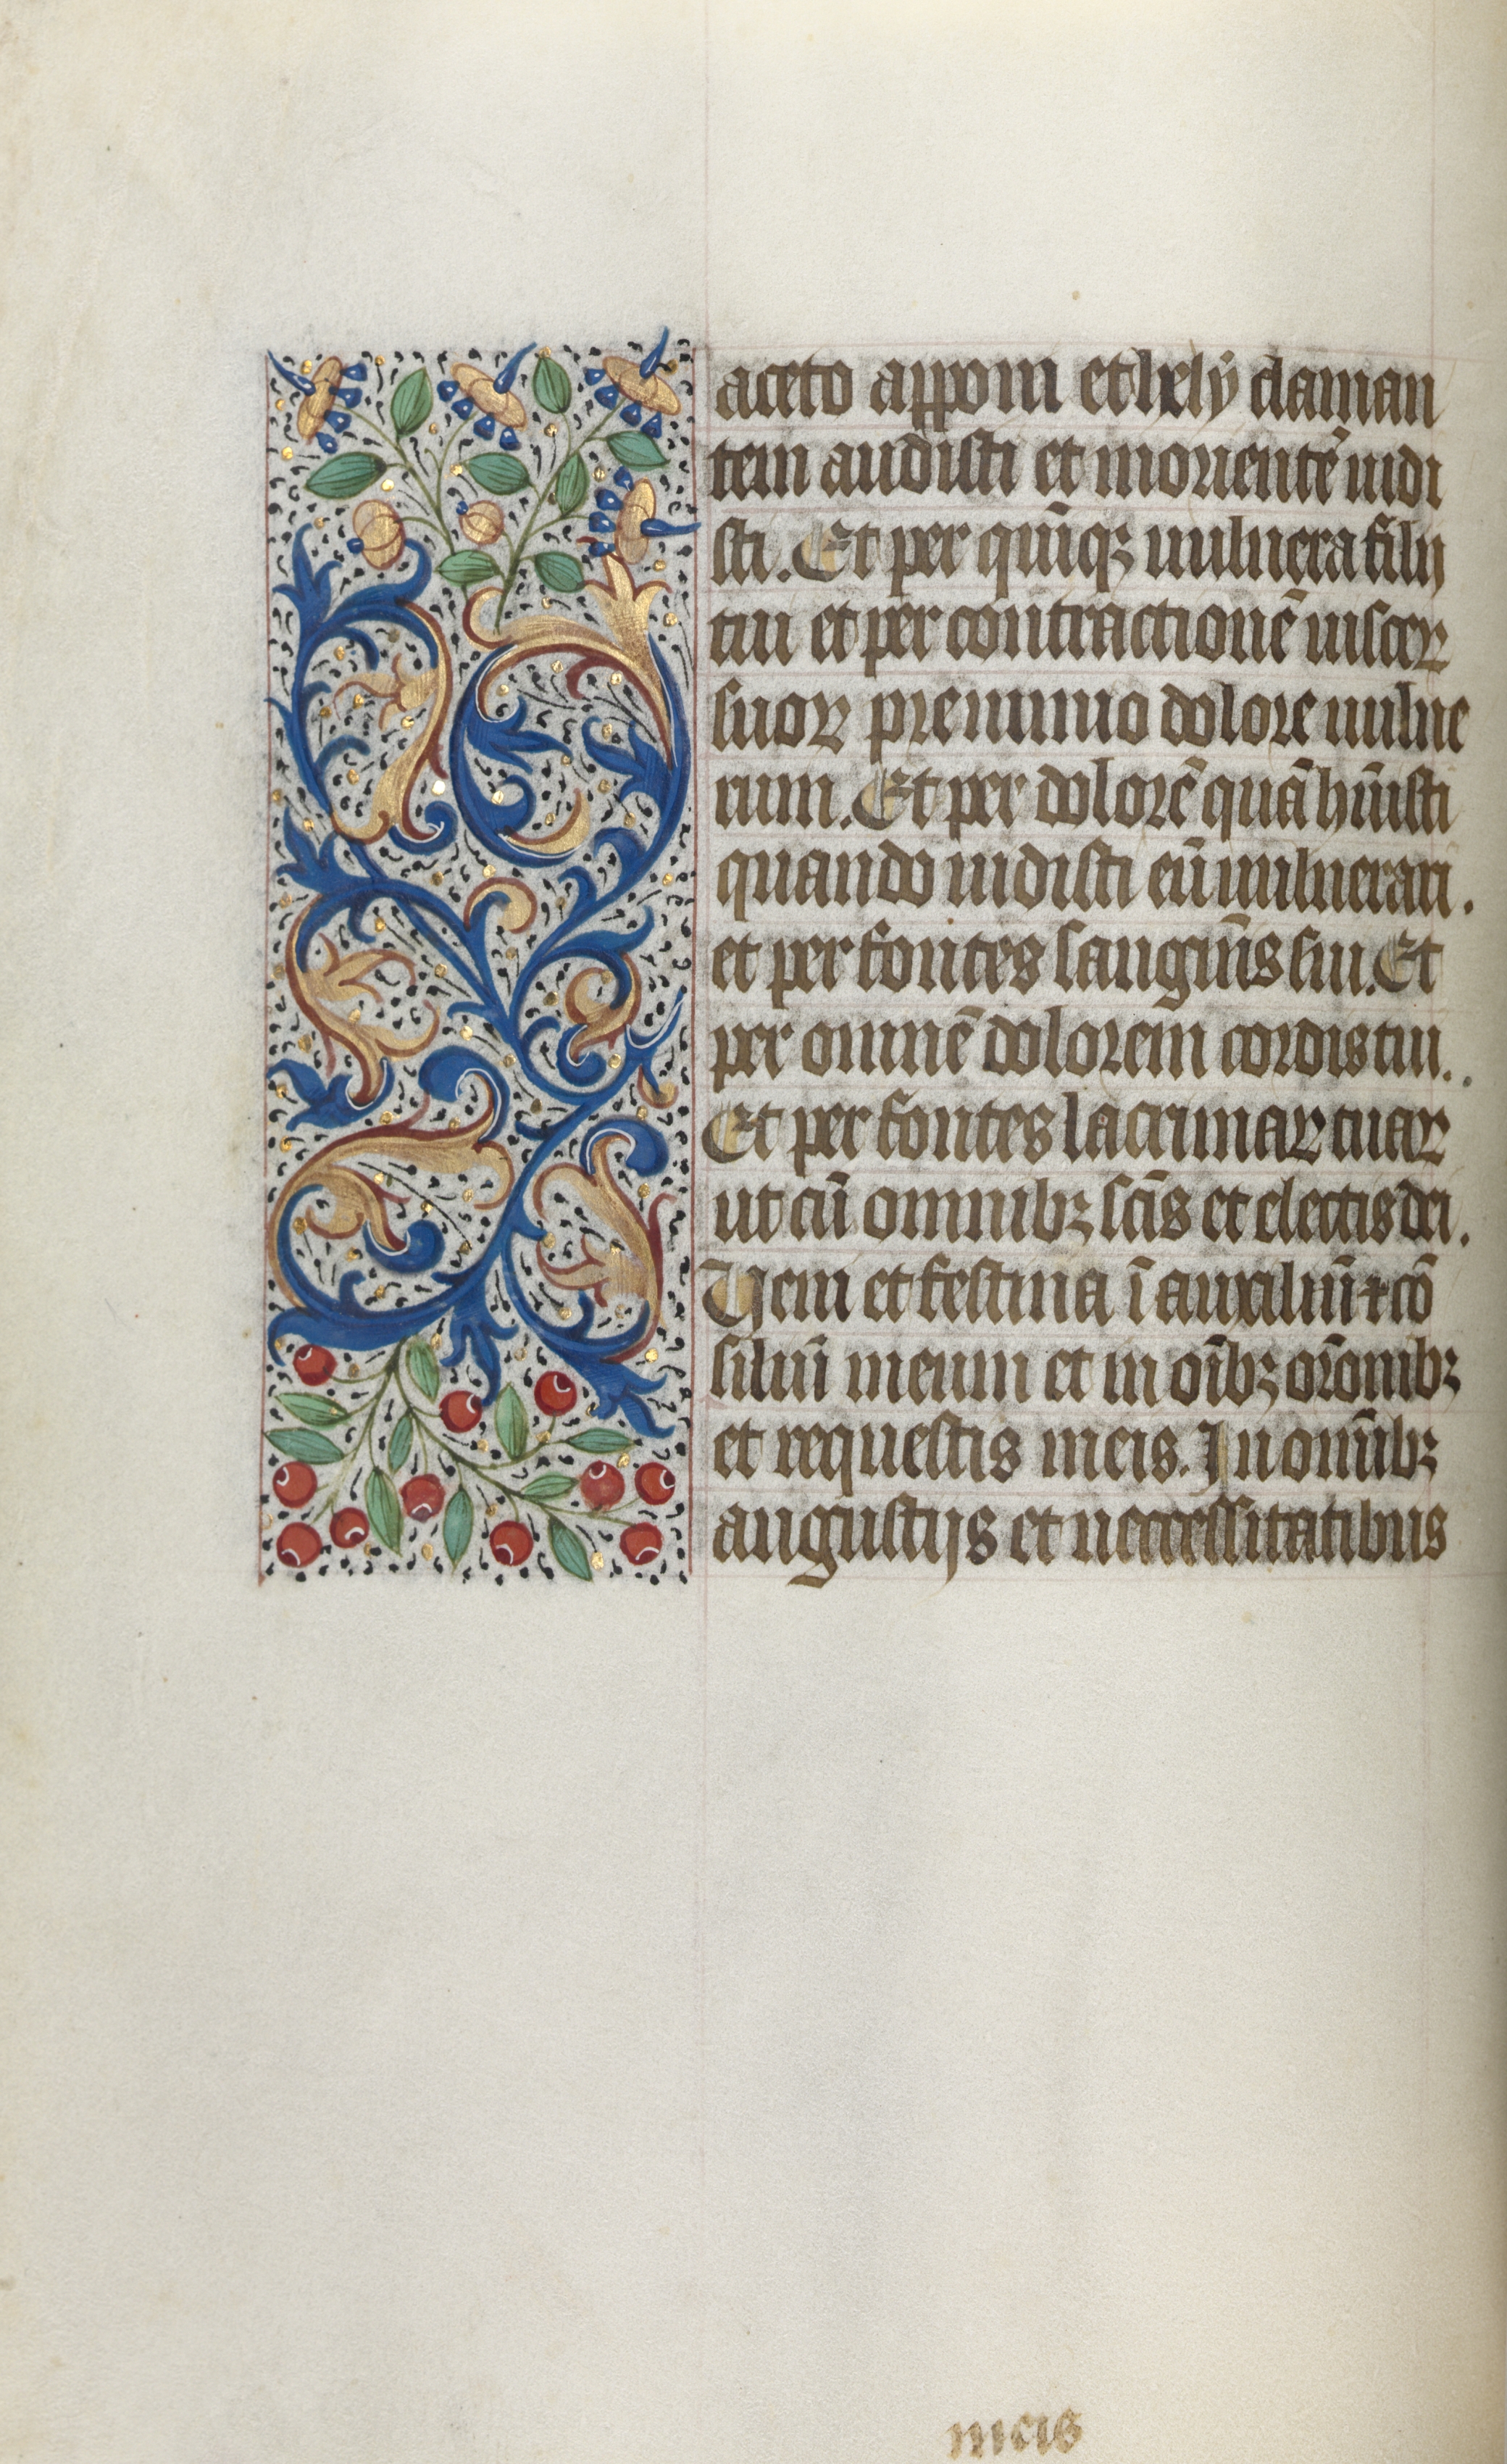 Book of Hours (Use of Rouen): fol. 20v